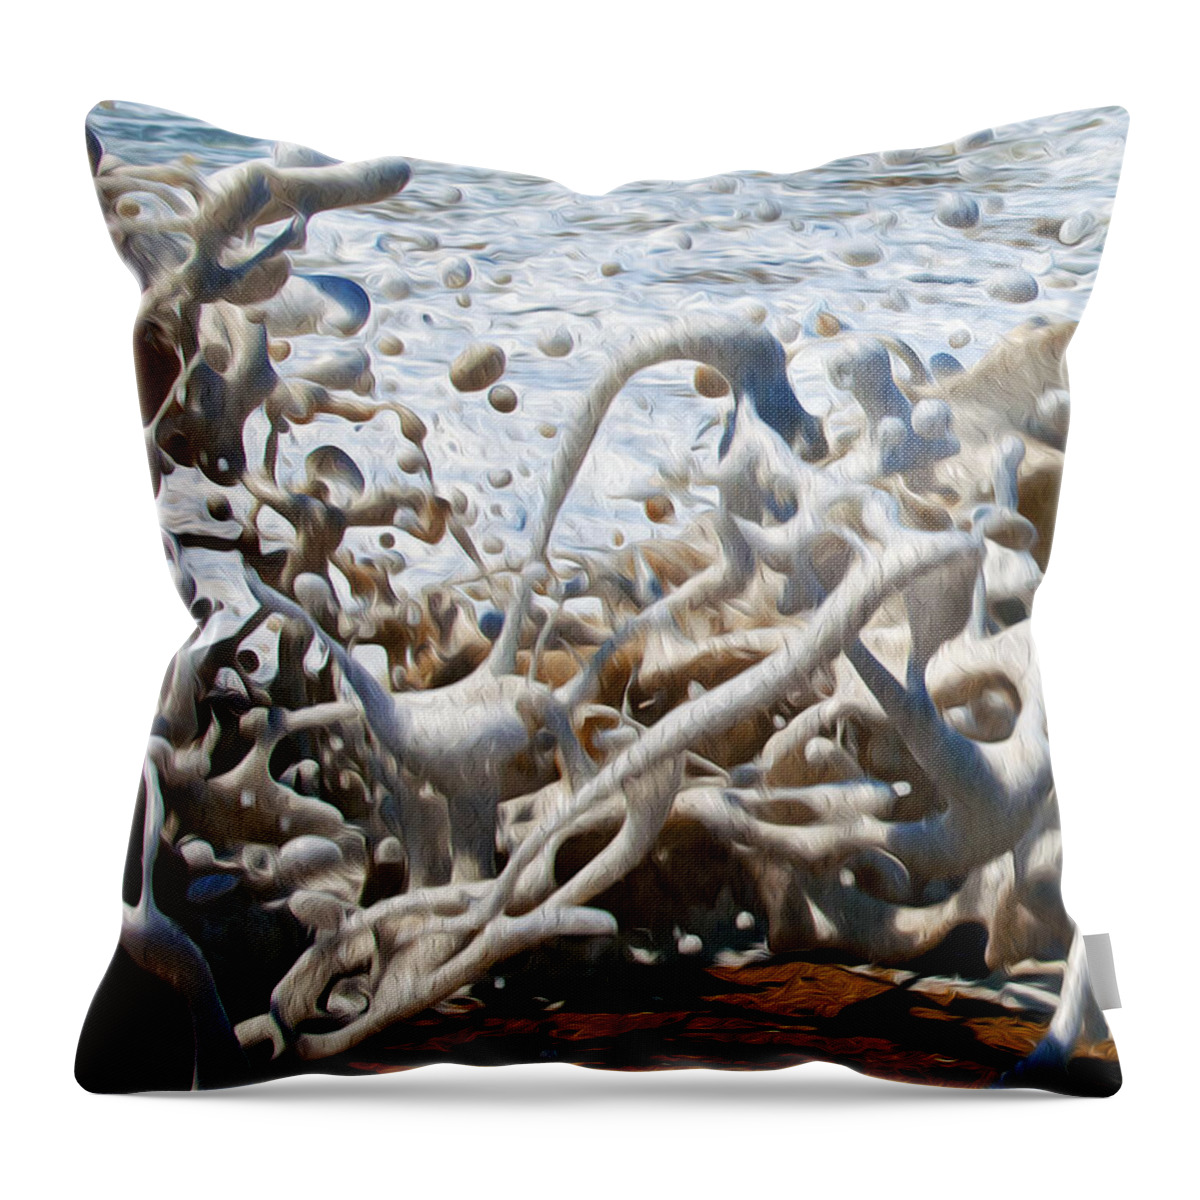 Surf Throw Pillow featuring the photograph Tidal Abstraction by Joe Schofield